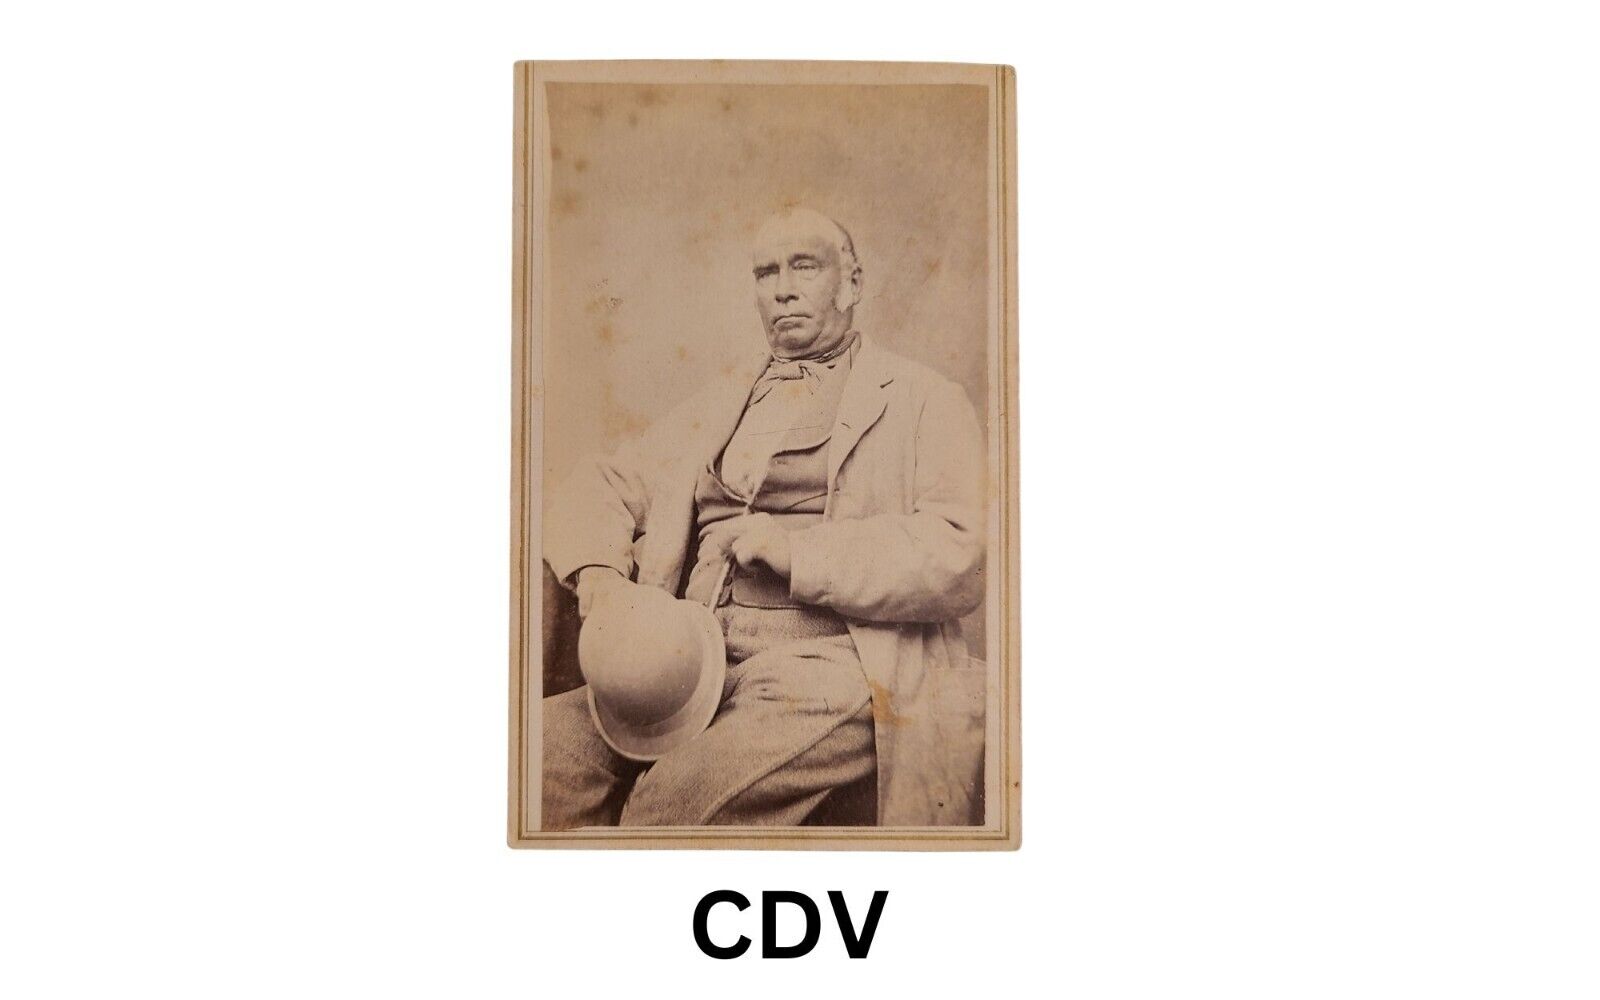 CDV PHOTOGRAPH - MAN - POSSIBLY AFRICAN AMERICAN ? - UNKNOWN STUDIO (217)